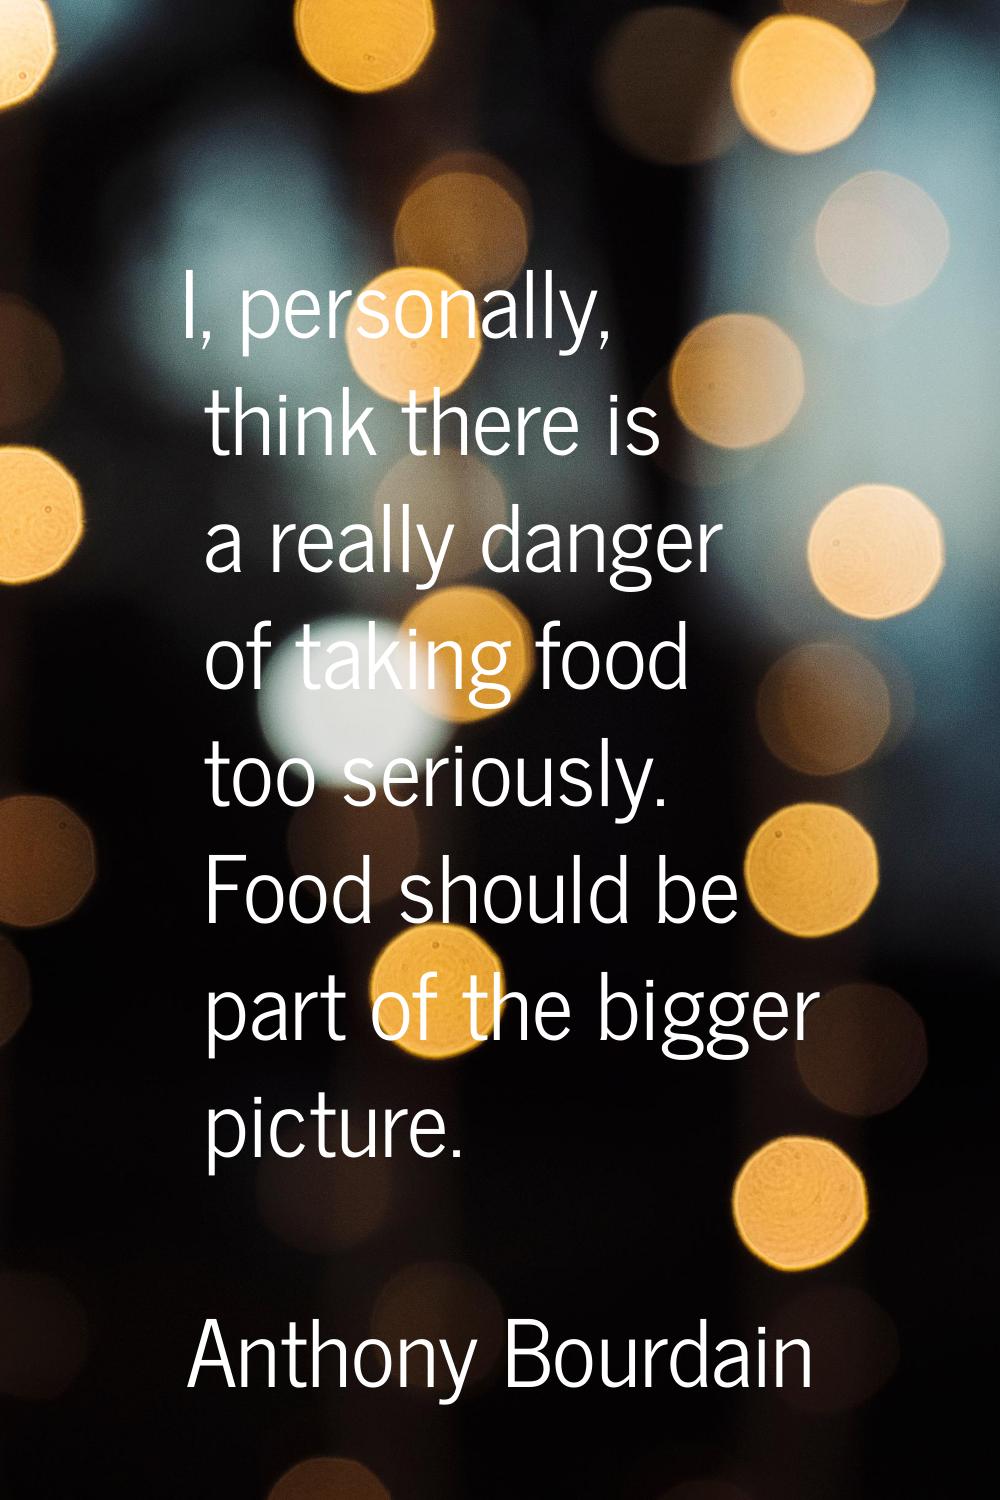 I, personally, think there is a really danger of taking food too seriously. Food should be part of 